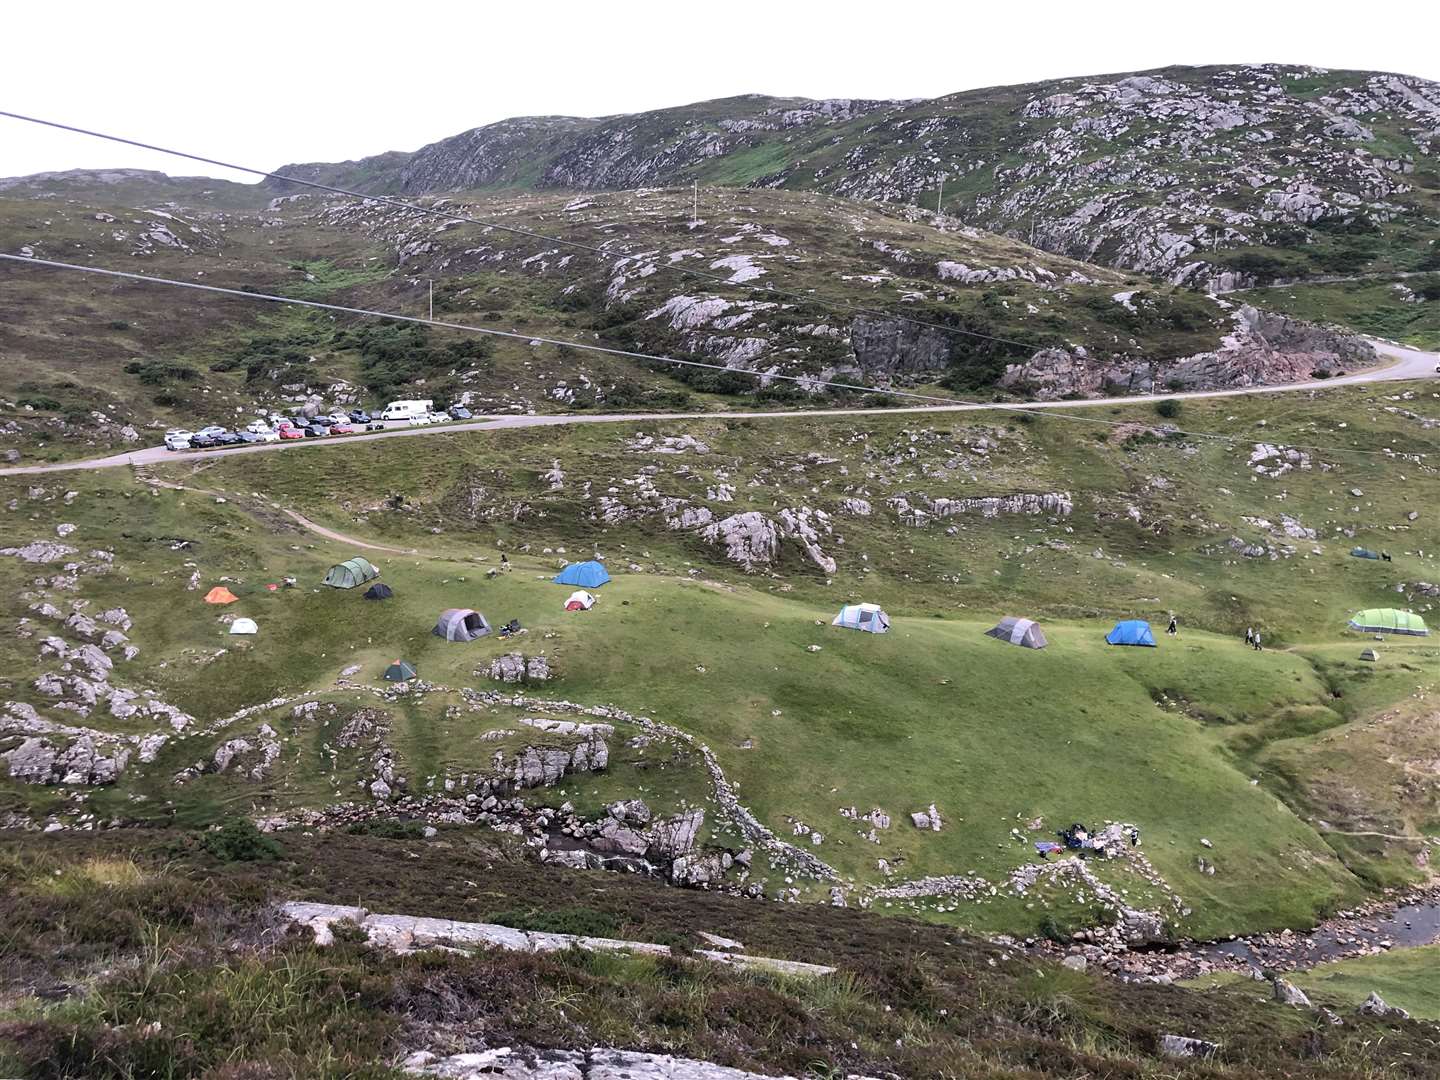 This image showing motorhomes and tents at Ceannabeinne, Durness, gave a sense of the scale of the tourism influx to the far north during the summer.